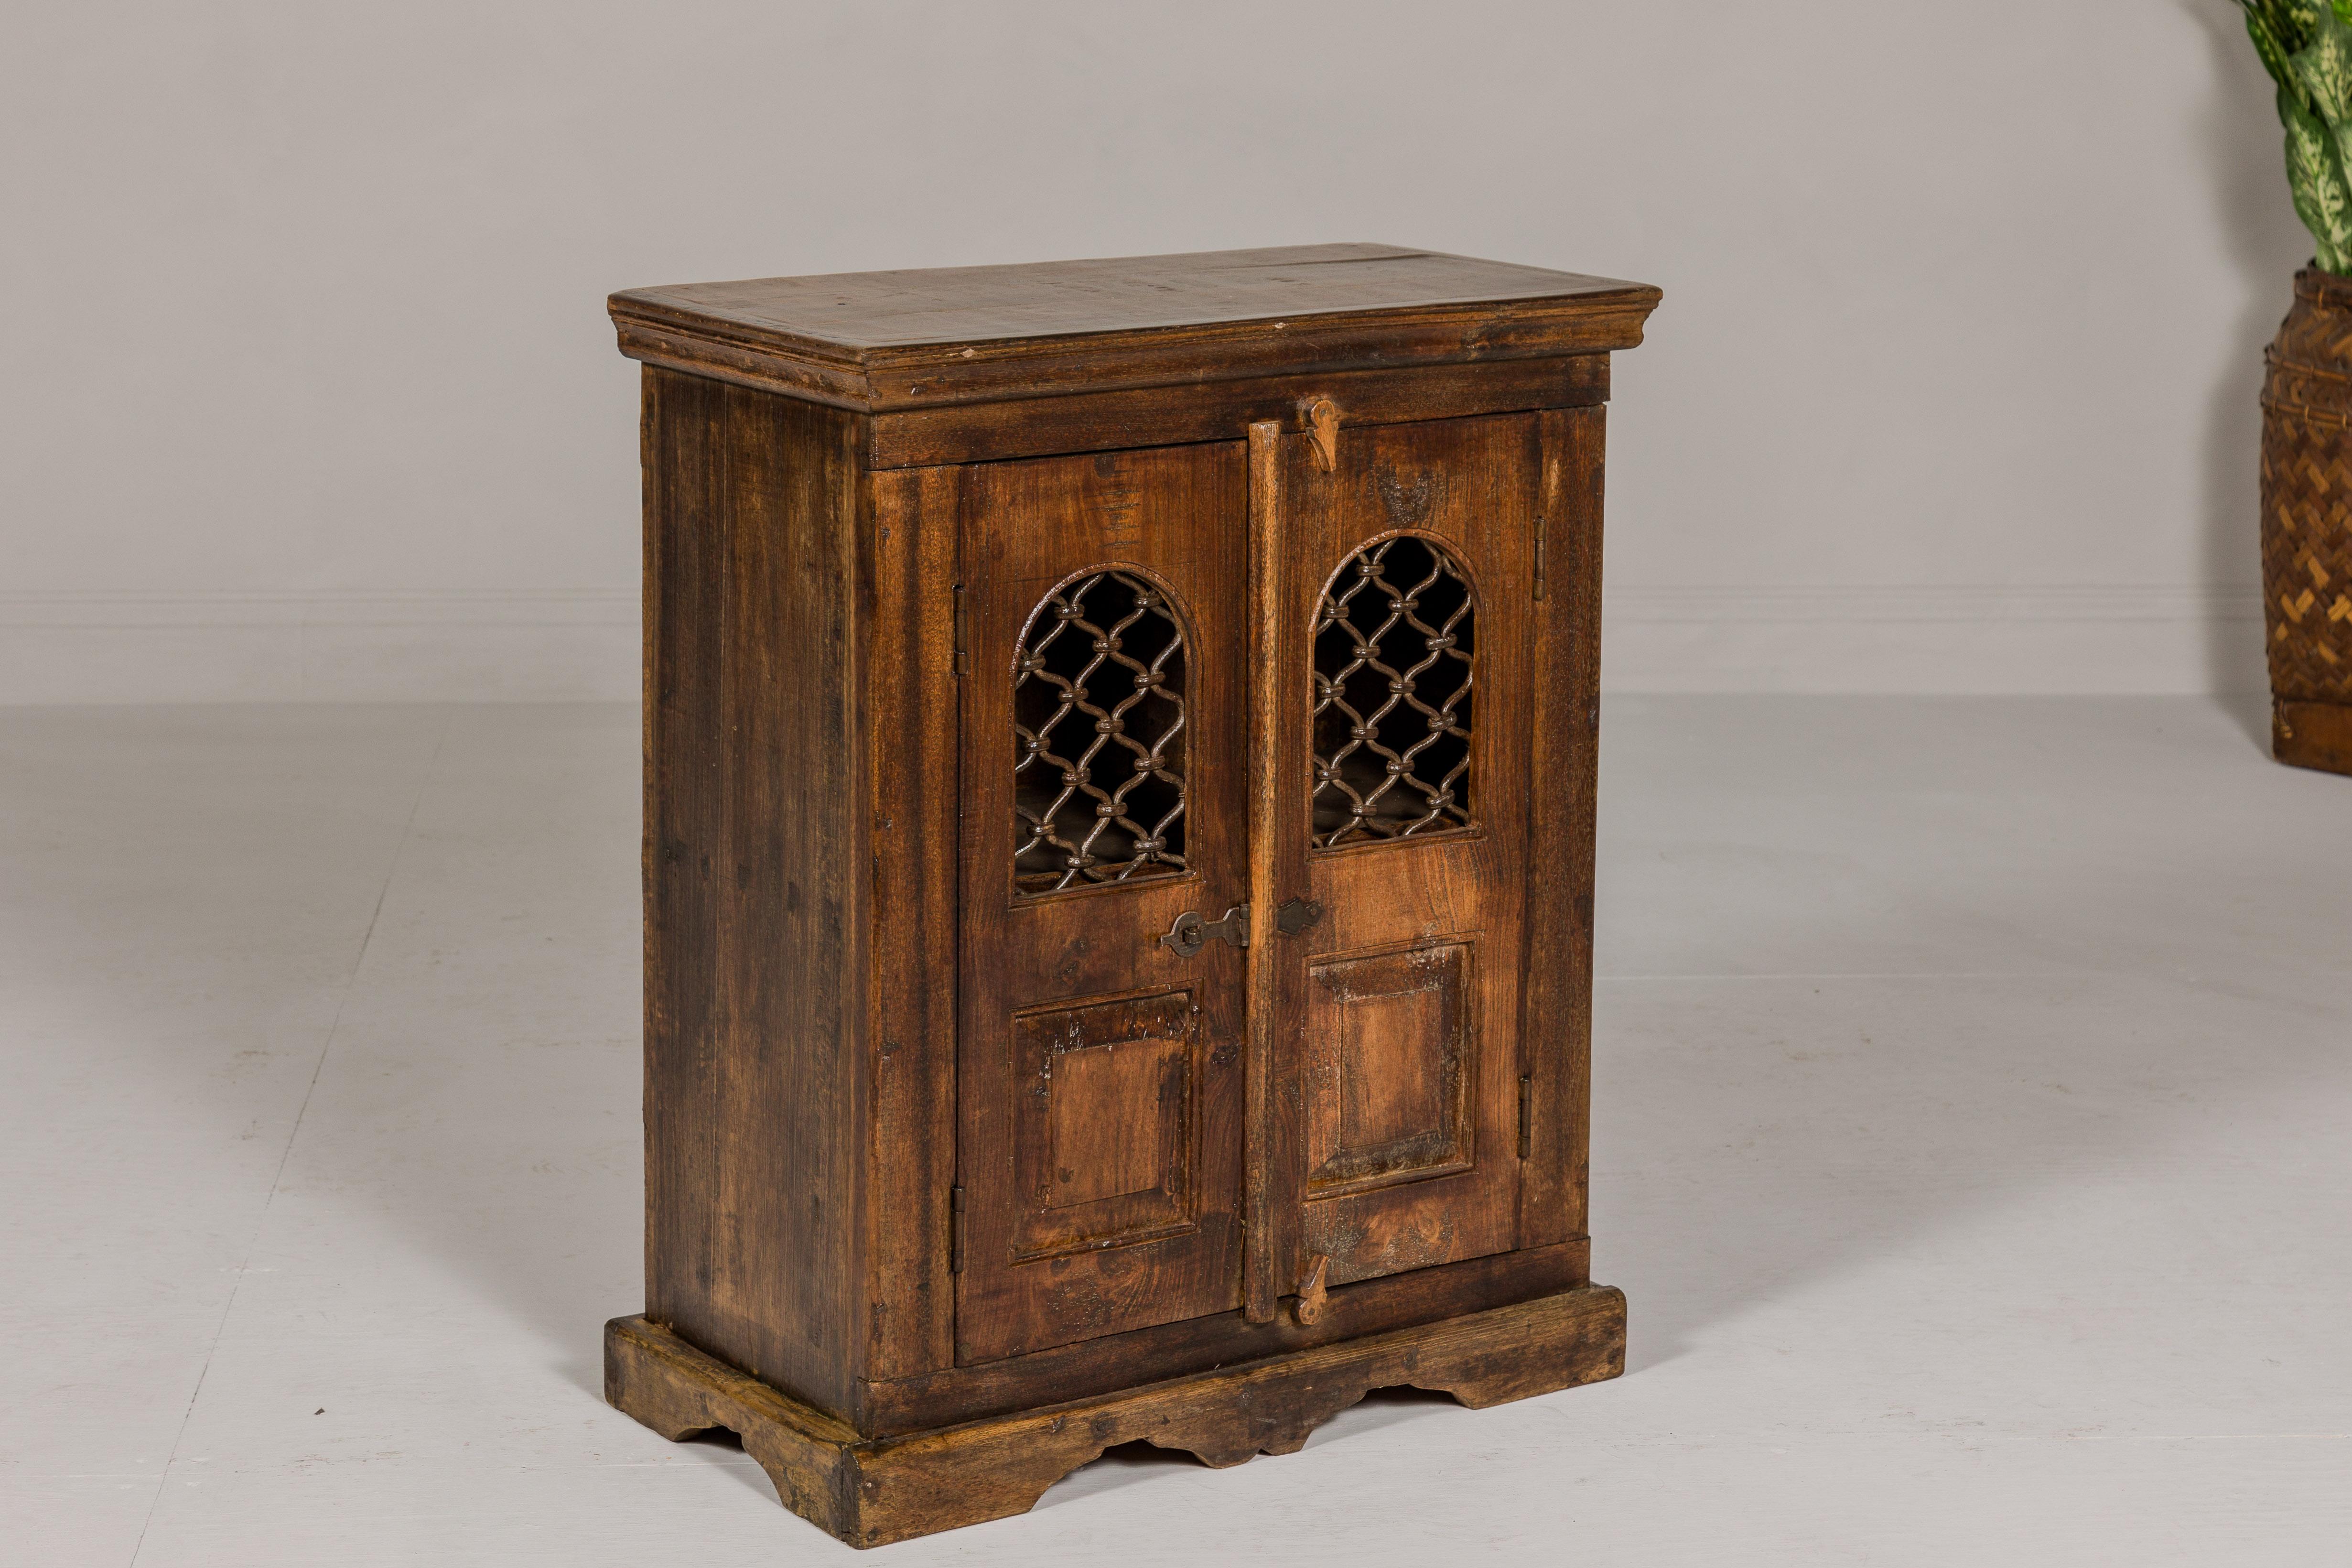 Indian 19th Century Wooden Side Cabinet with Arched Metal Grate Window Door For Sale 11